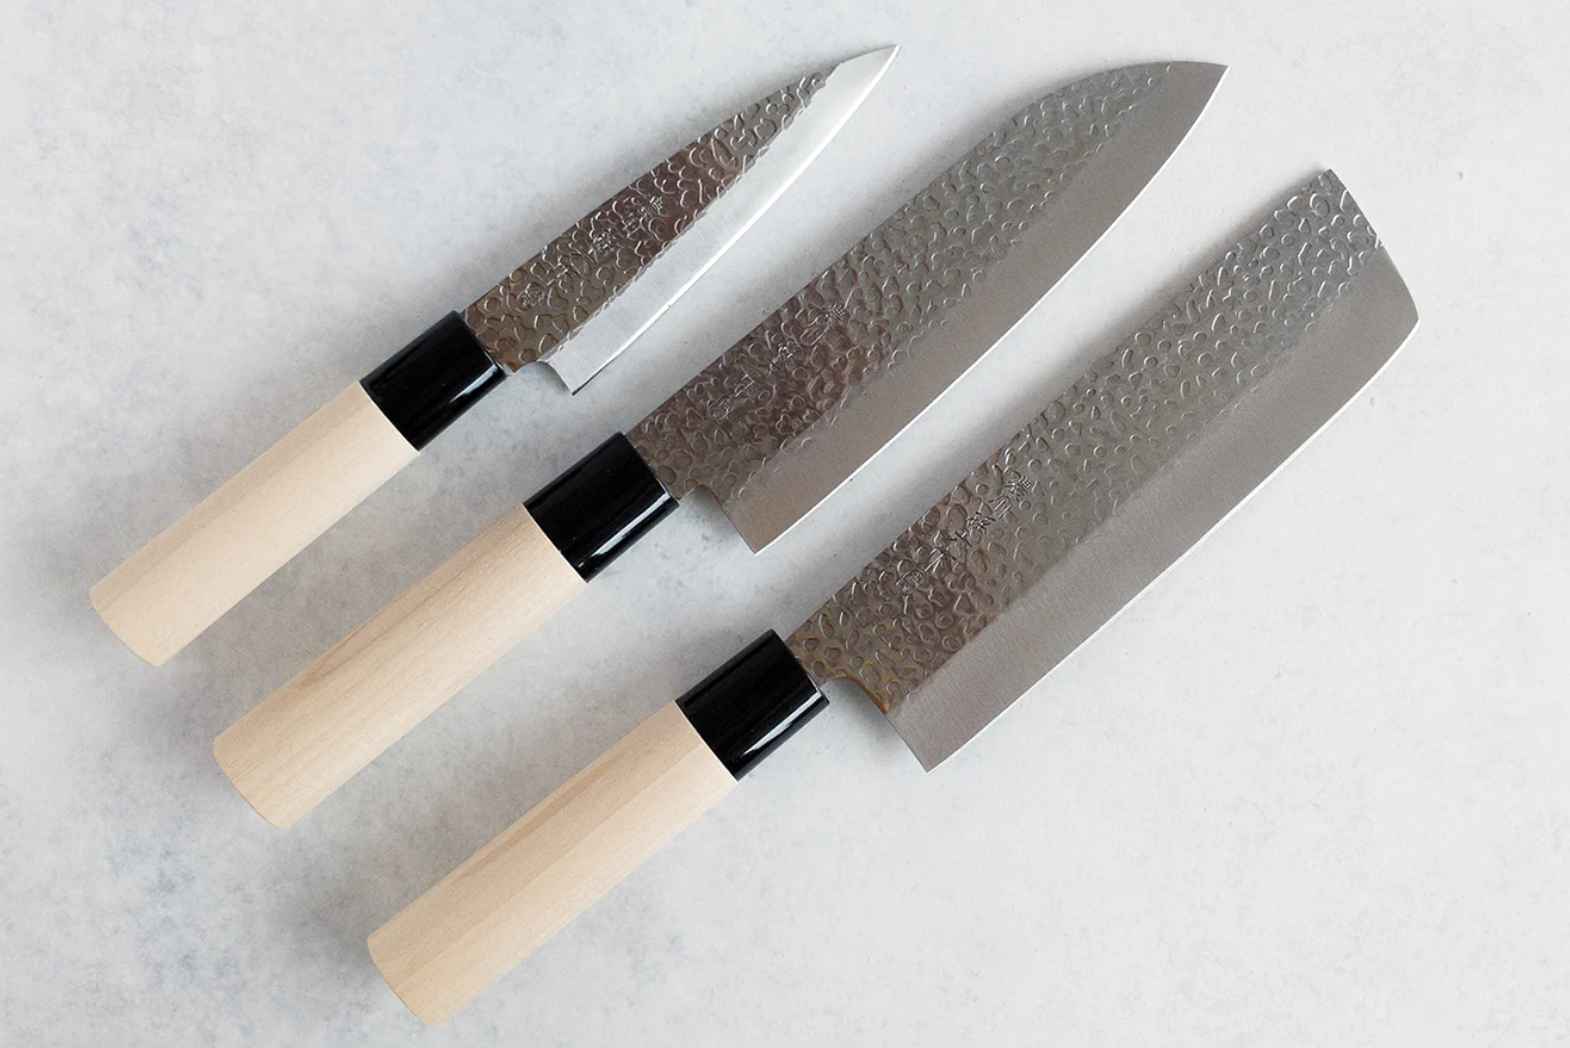 Buyers guide to kitchen knives